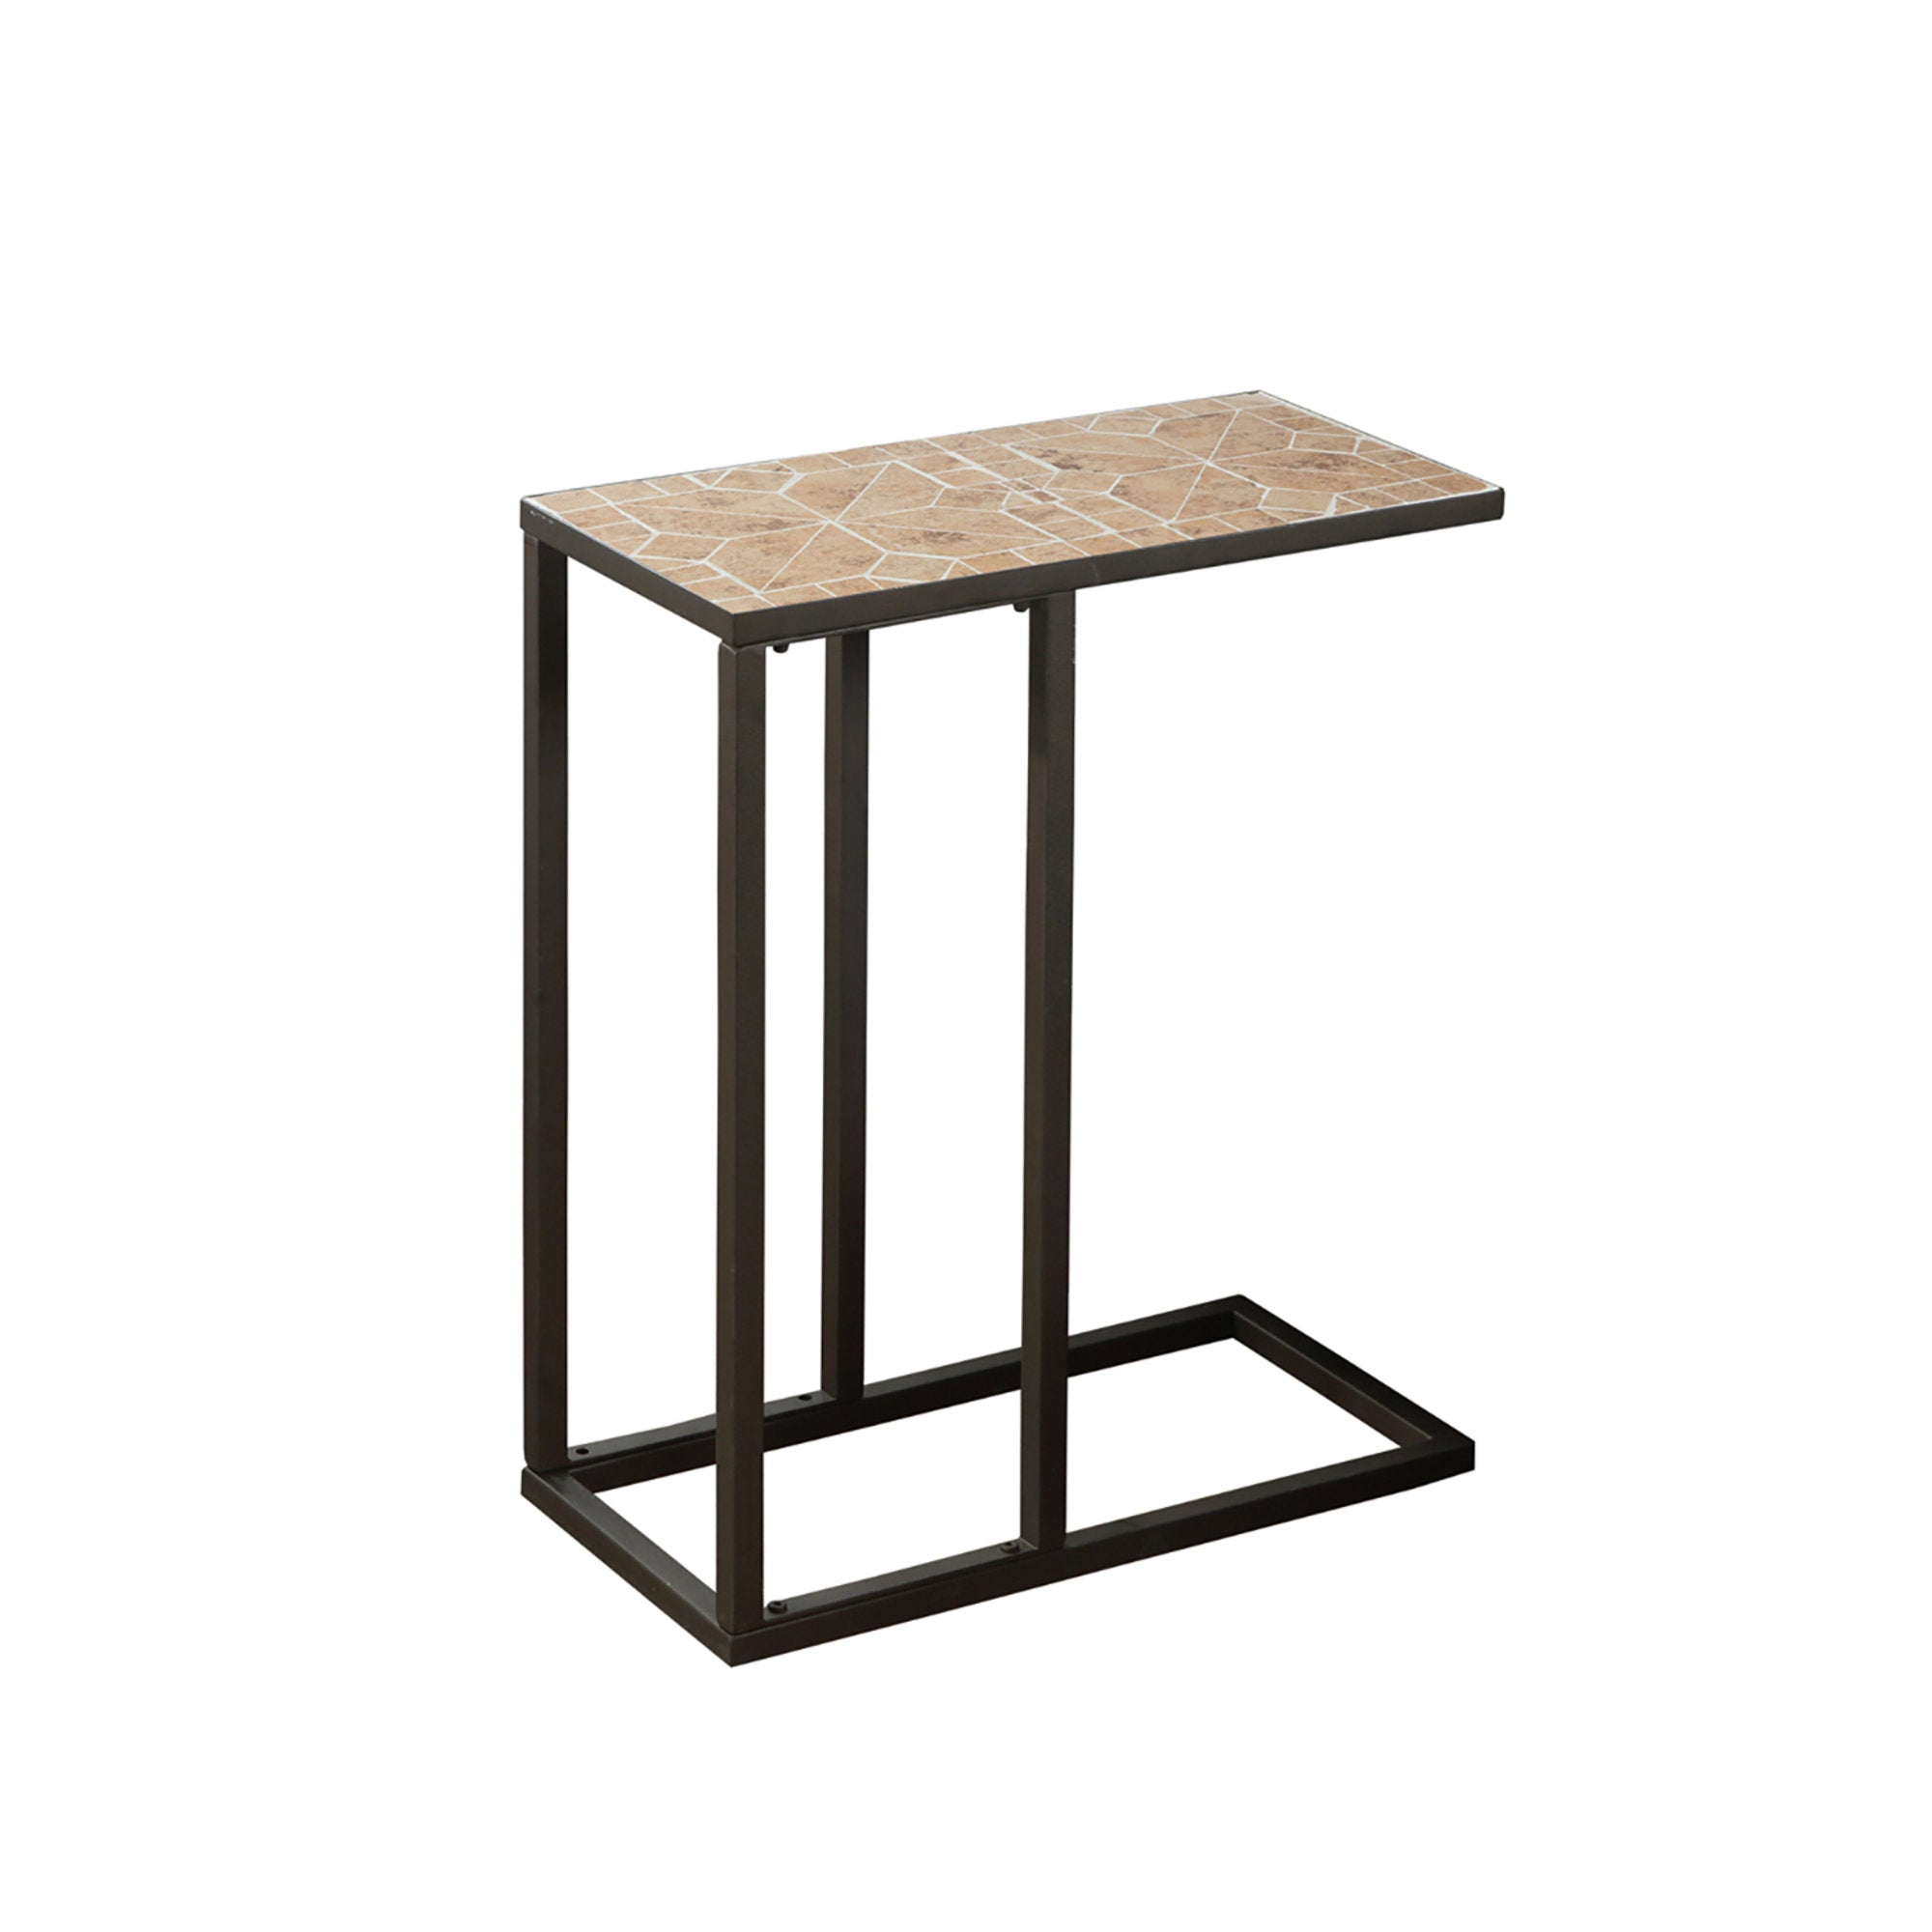 ACCENT TABLE - TERRACOTTA TILE TOP / HAMMERED BROWN